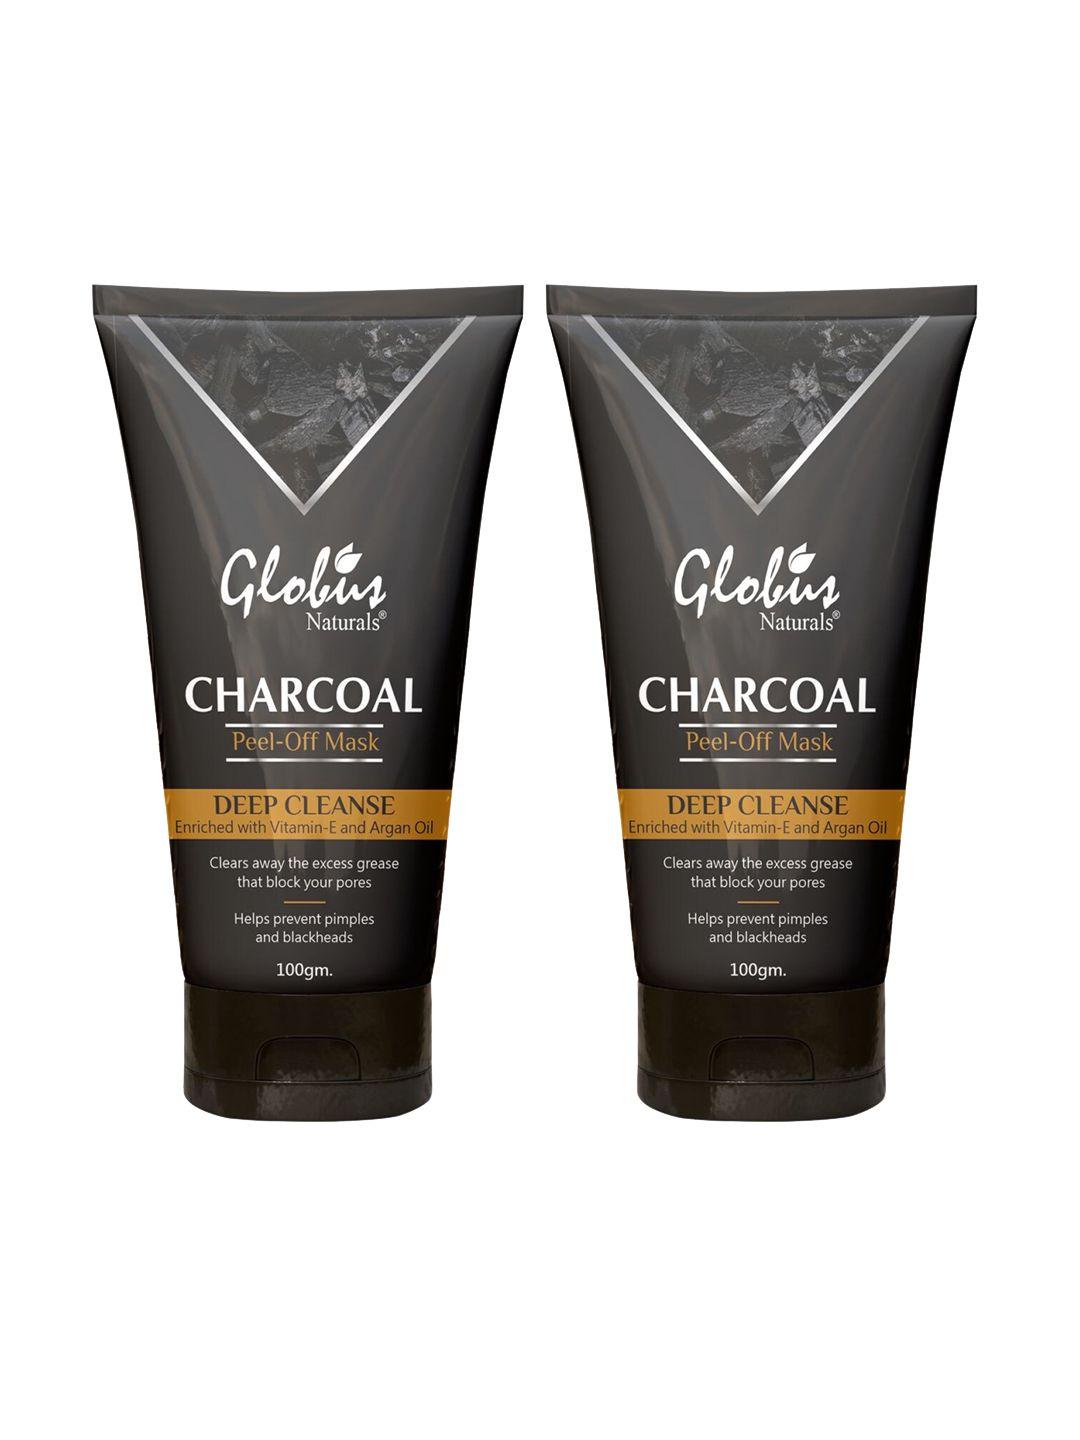 globus naturals set of 5 charcoal peel off mask enriched with vitamin-e & argan oil - 100gm each